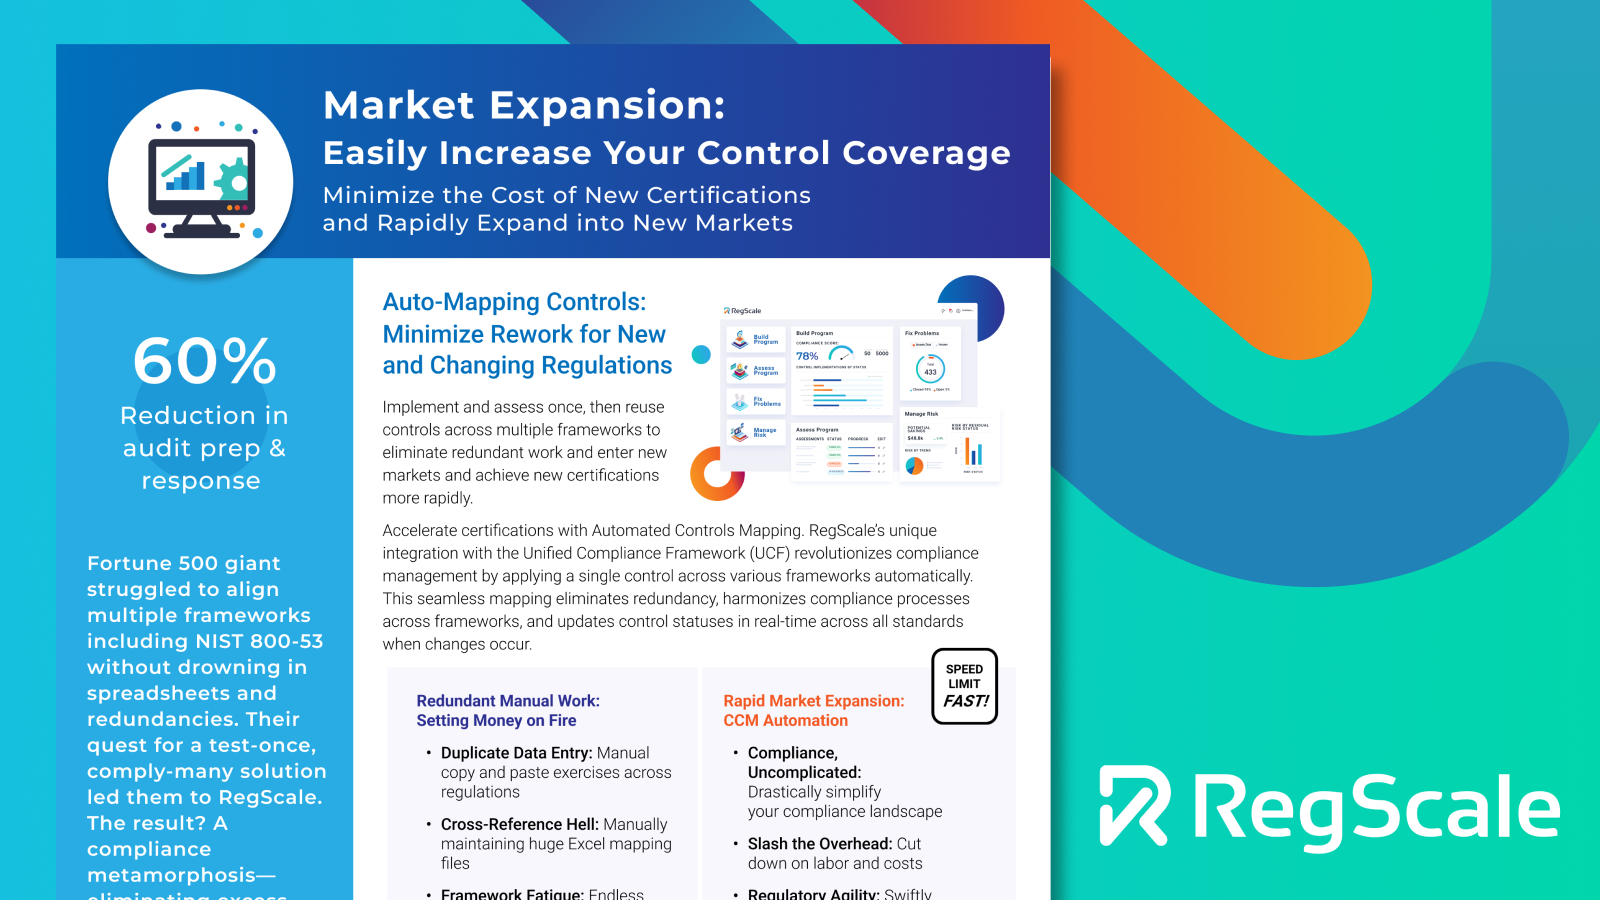 Market Expansion Easily Increase Your Control Coverage